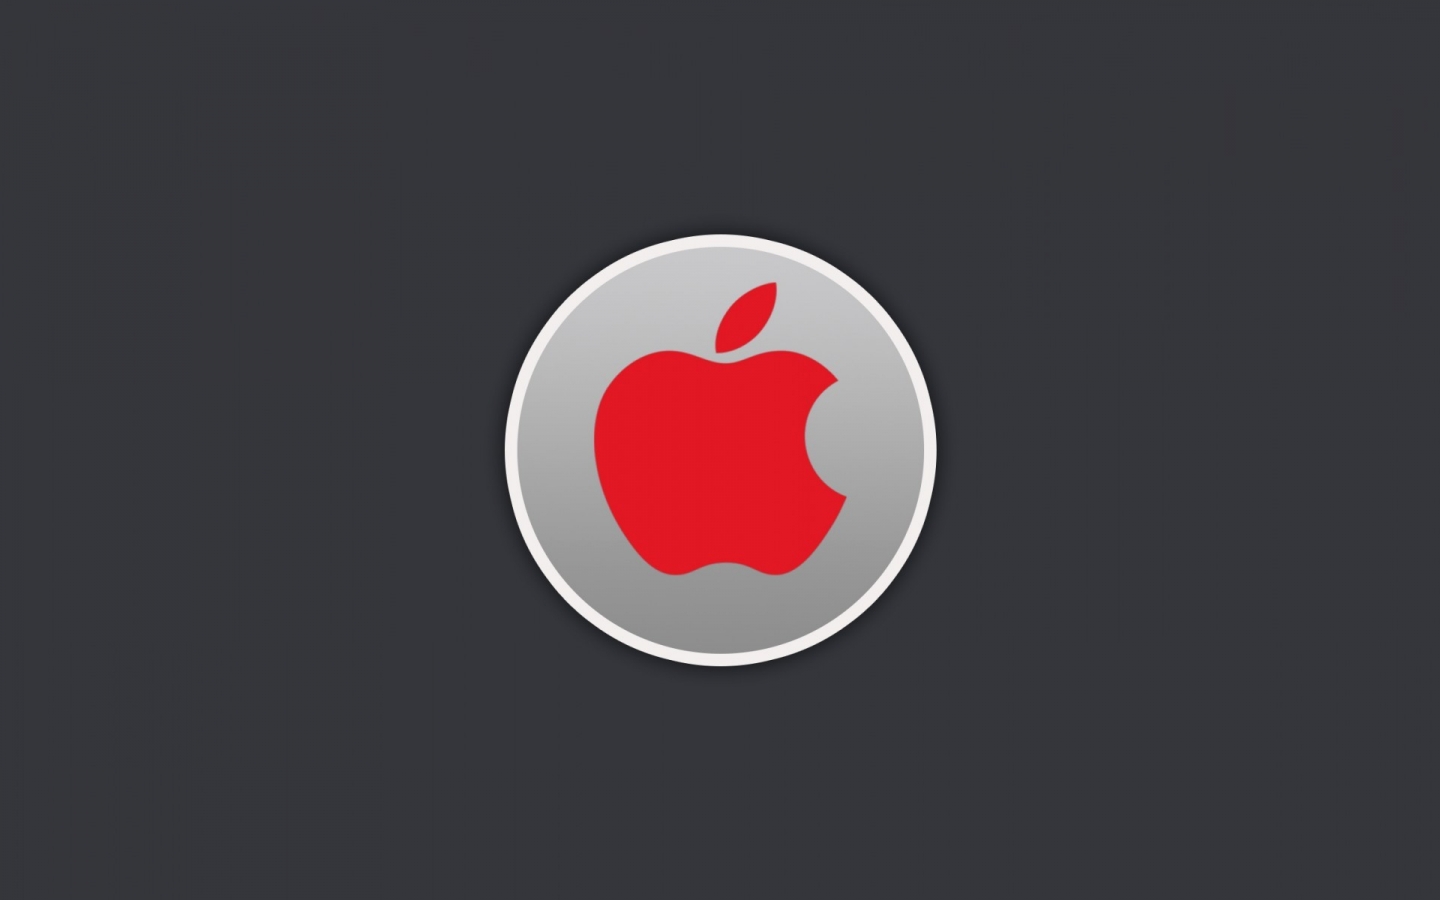 Red Apple Logo for 1440 x 900 widescreen resolution